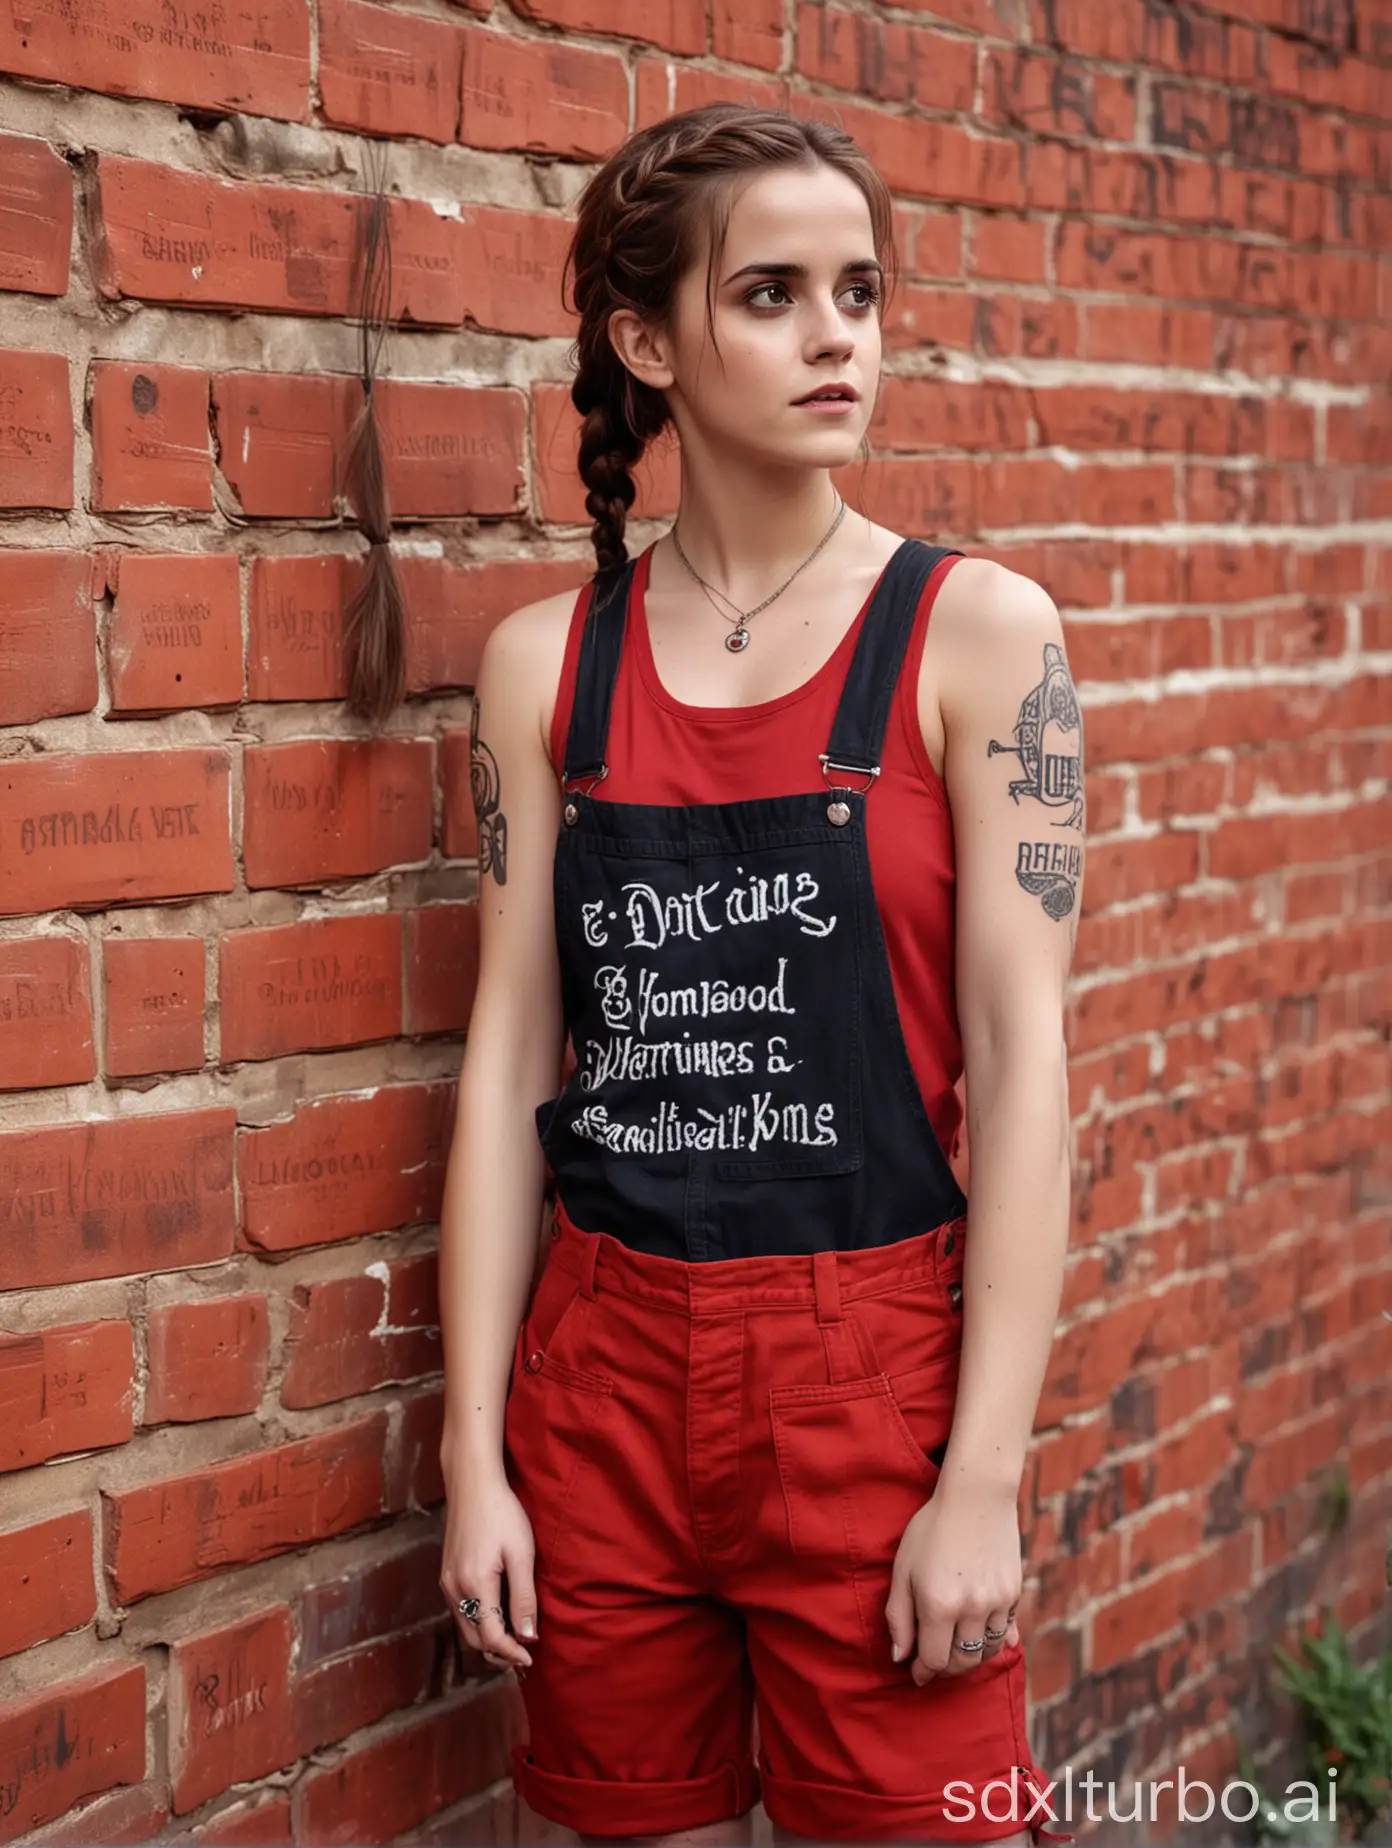 Emma-Watson-in-Red-Dungarees-and-Tank-Top-Gothic-Makeup-Smoking-by-Graffitied-Wall